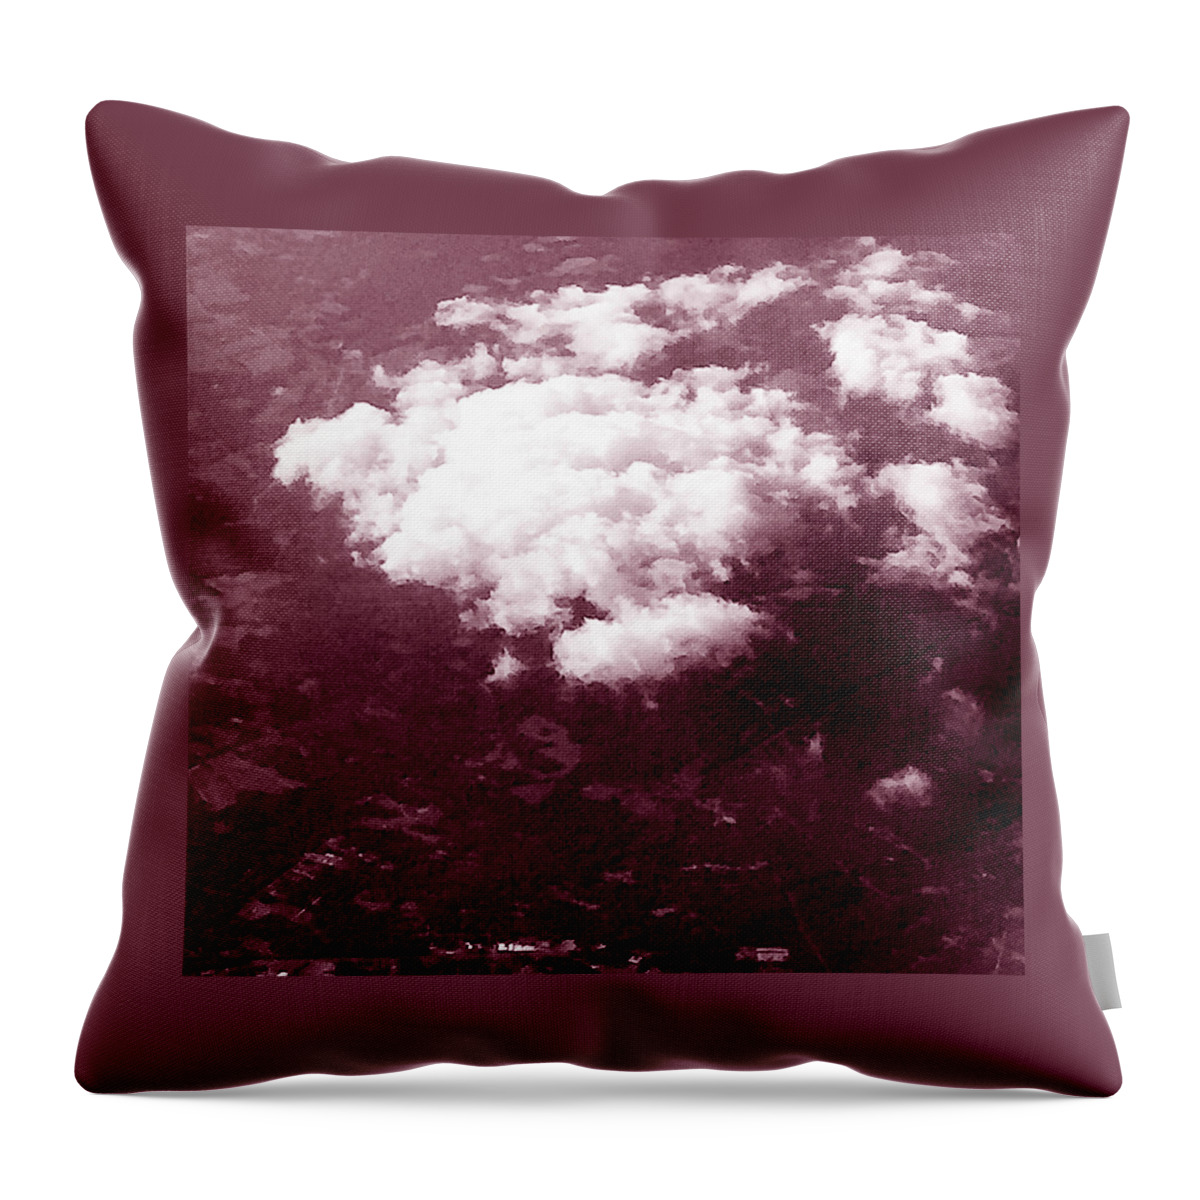 Calm Loliop Clouds Throw Pillow featuring the painting Enchatoo by Trevor A Smith